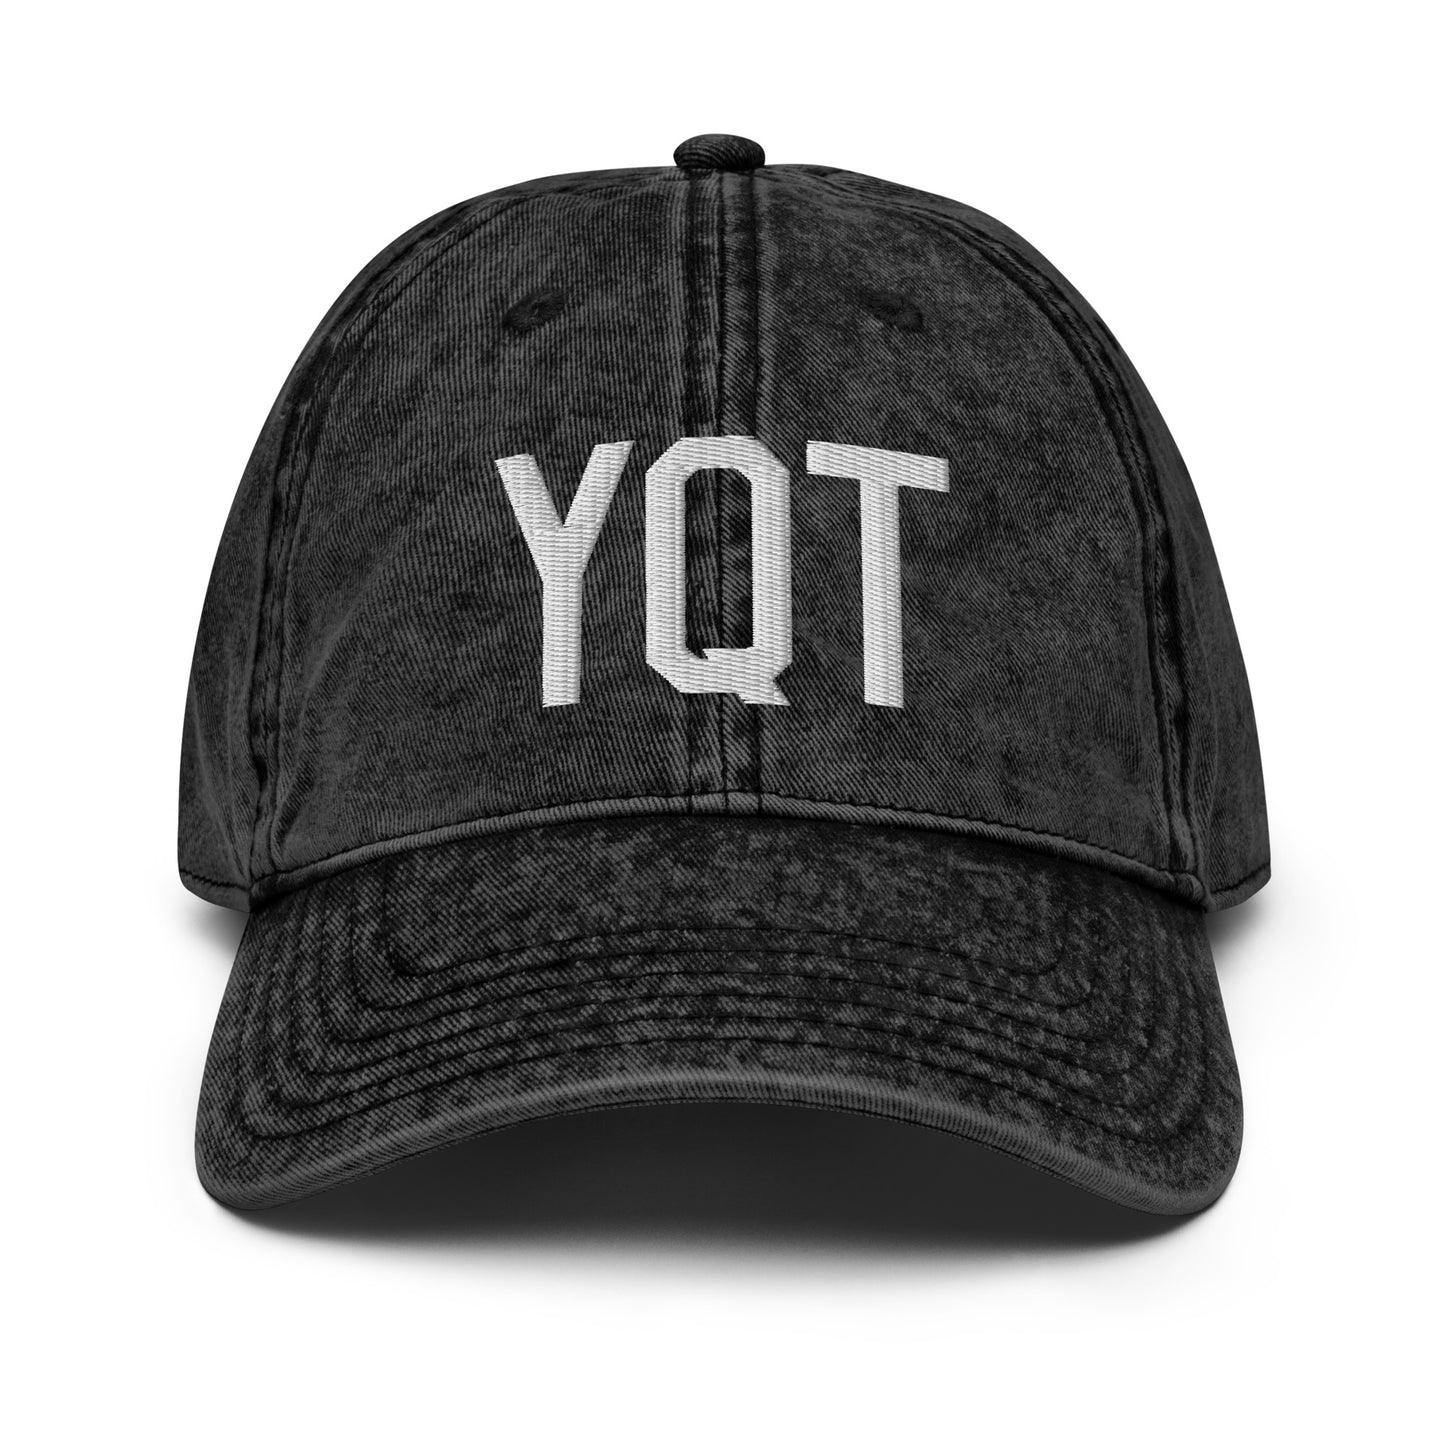 Airport Code Twill Cap - White • YQT Thunder Bay • YHM Designs - Image 14